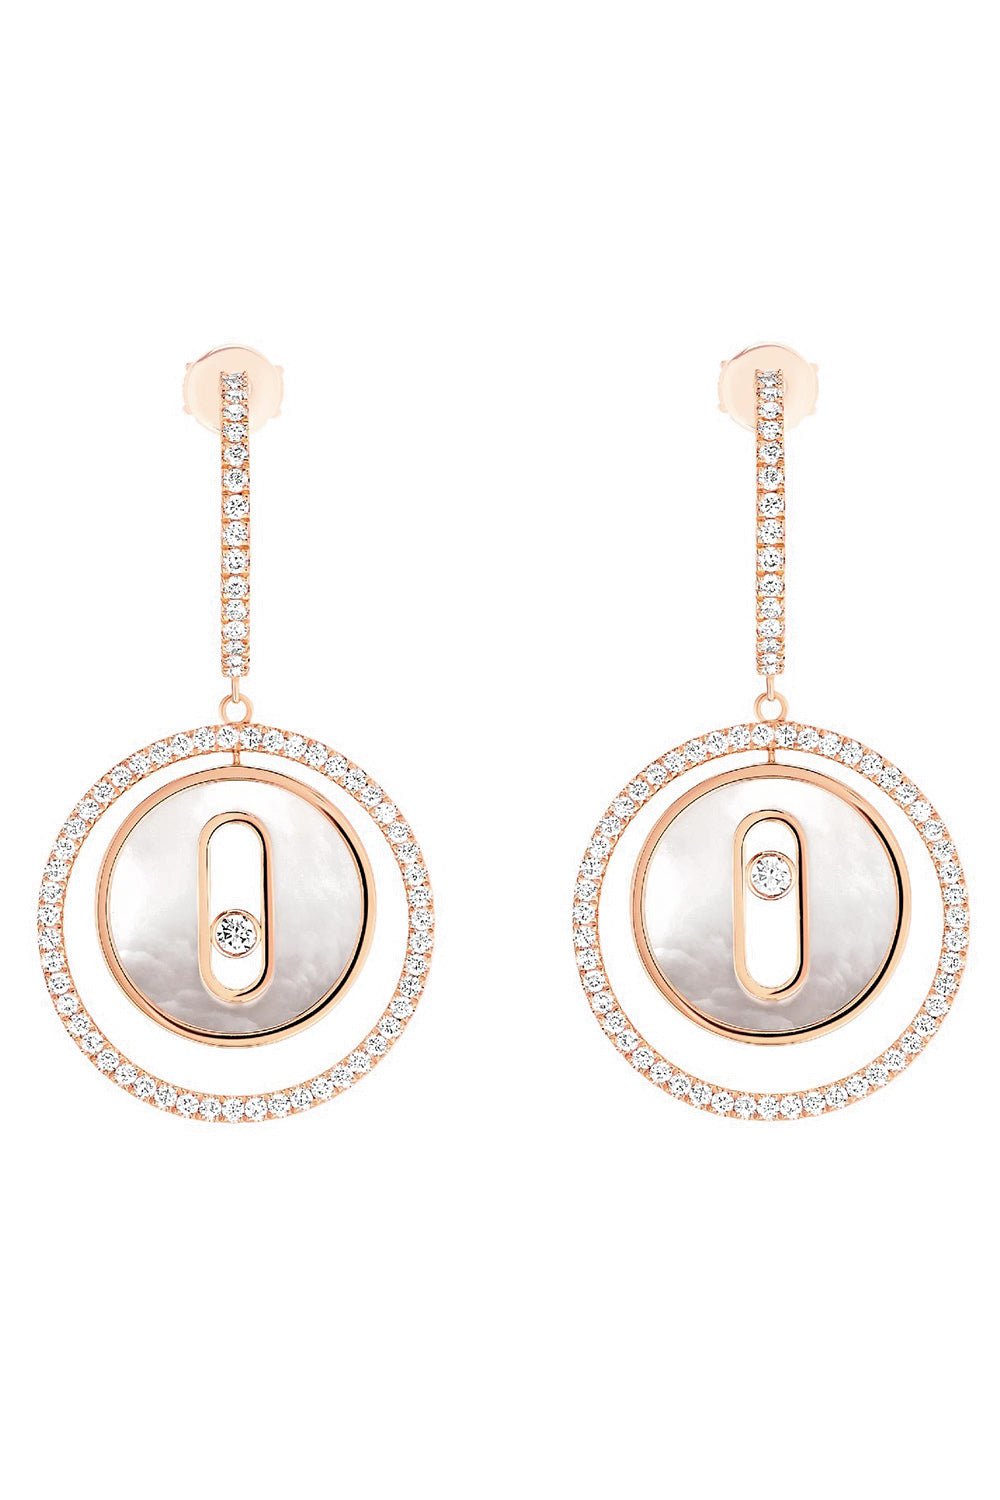 MESSIKA-Lucky Move PM Earrings-ROSE GOLD